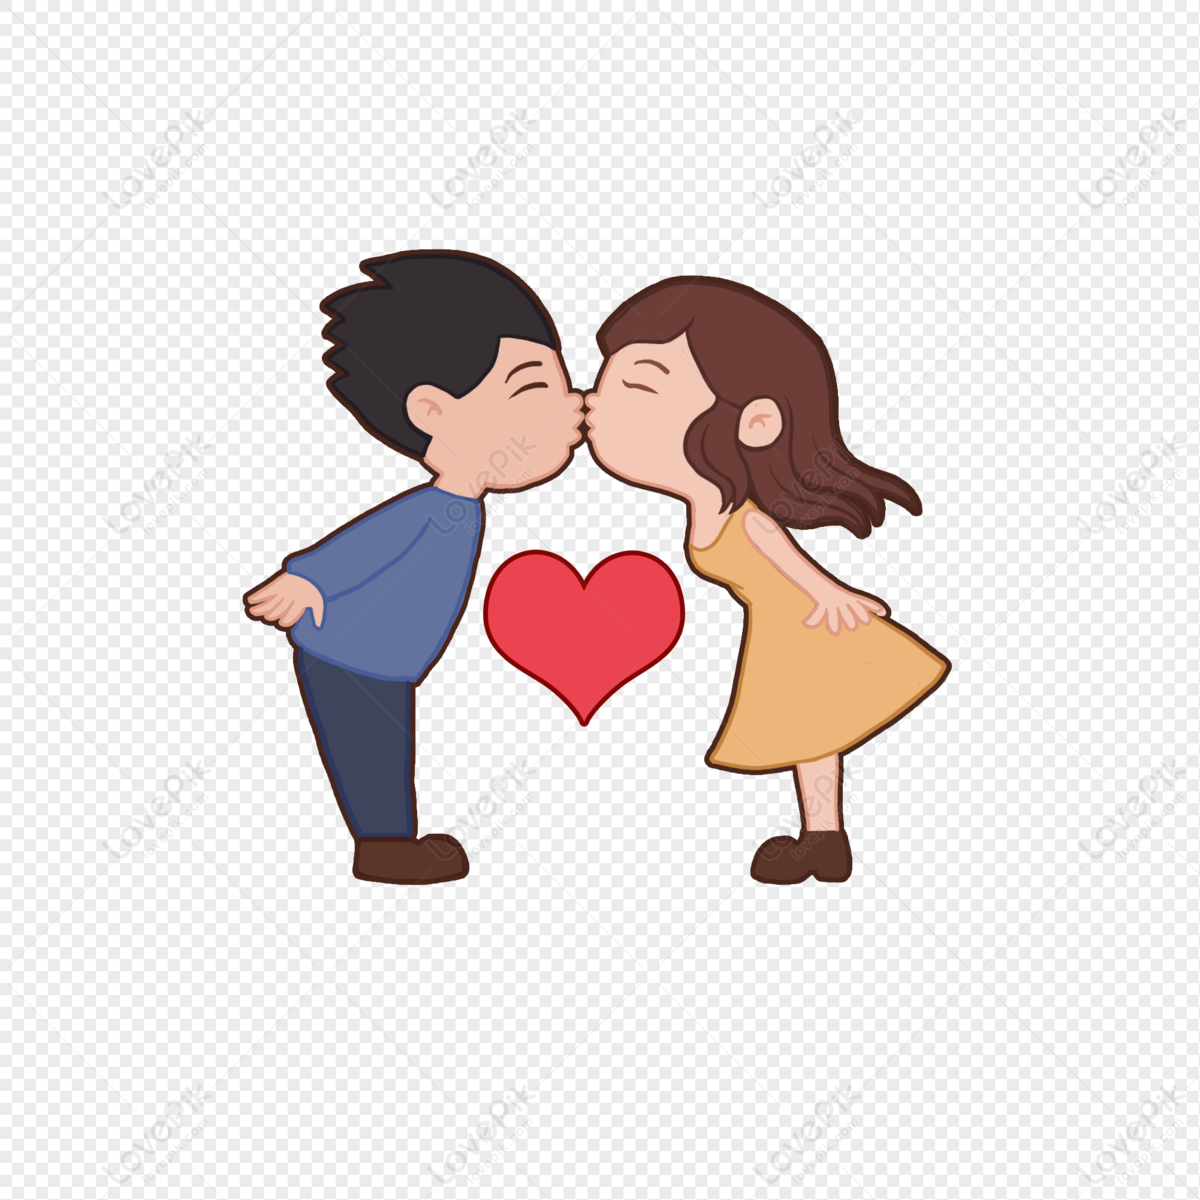 Love Kissing Couple PNG Hd Transparent Image And Clipart Image For ...